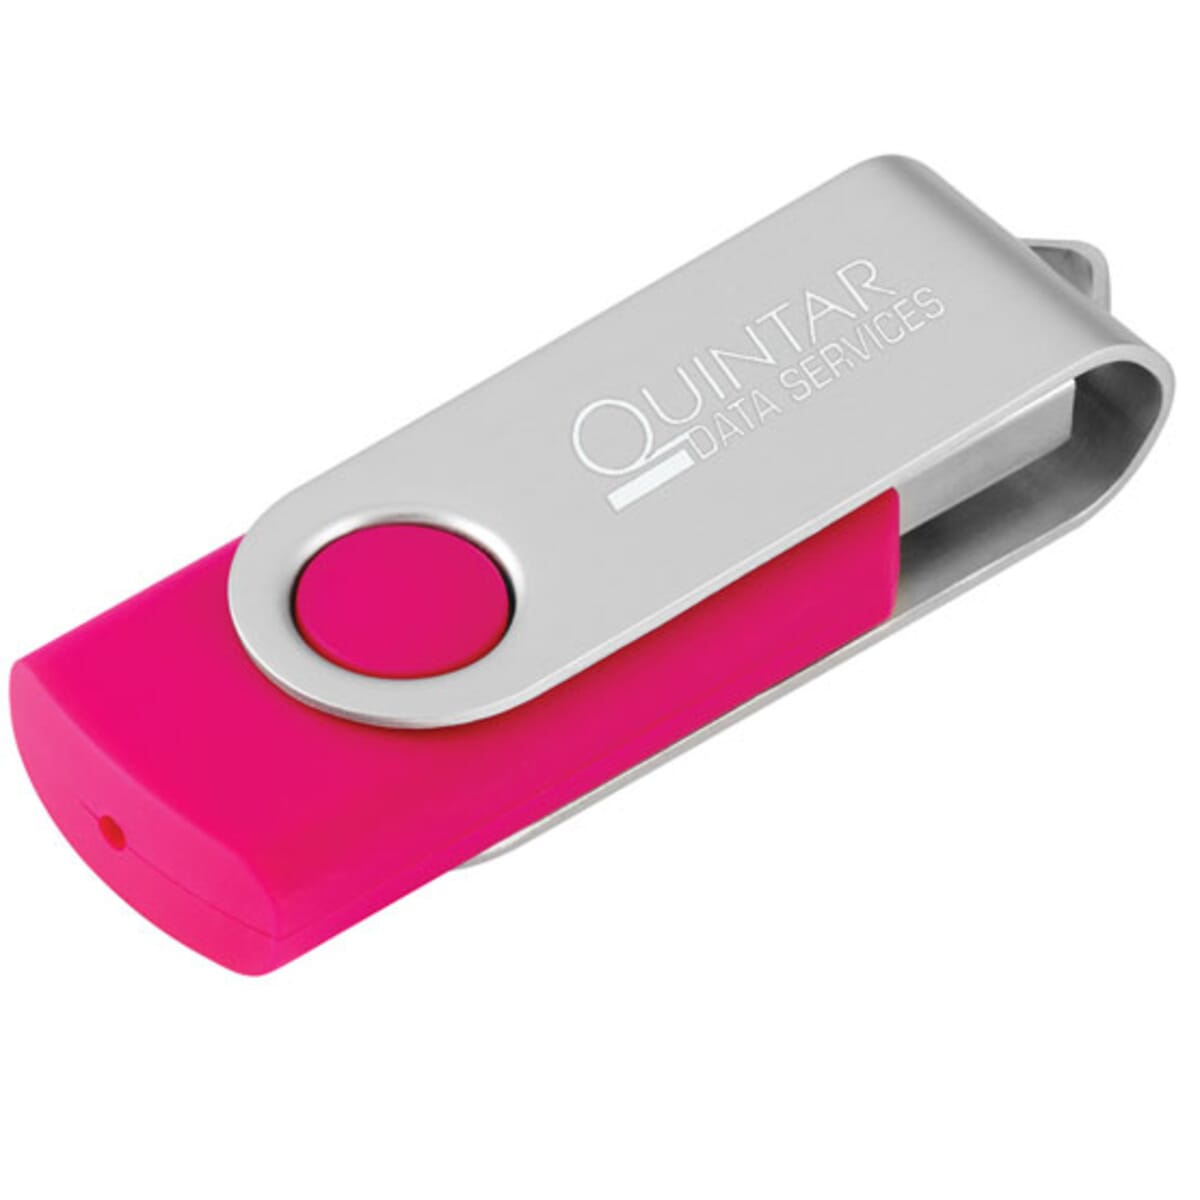 Personalized promotional USB drives in bulk